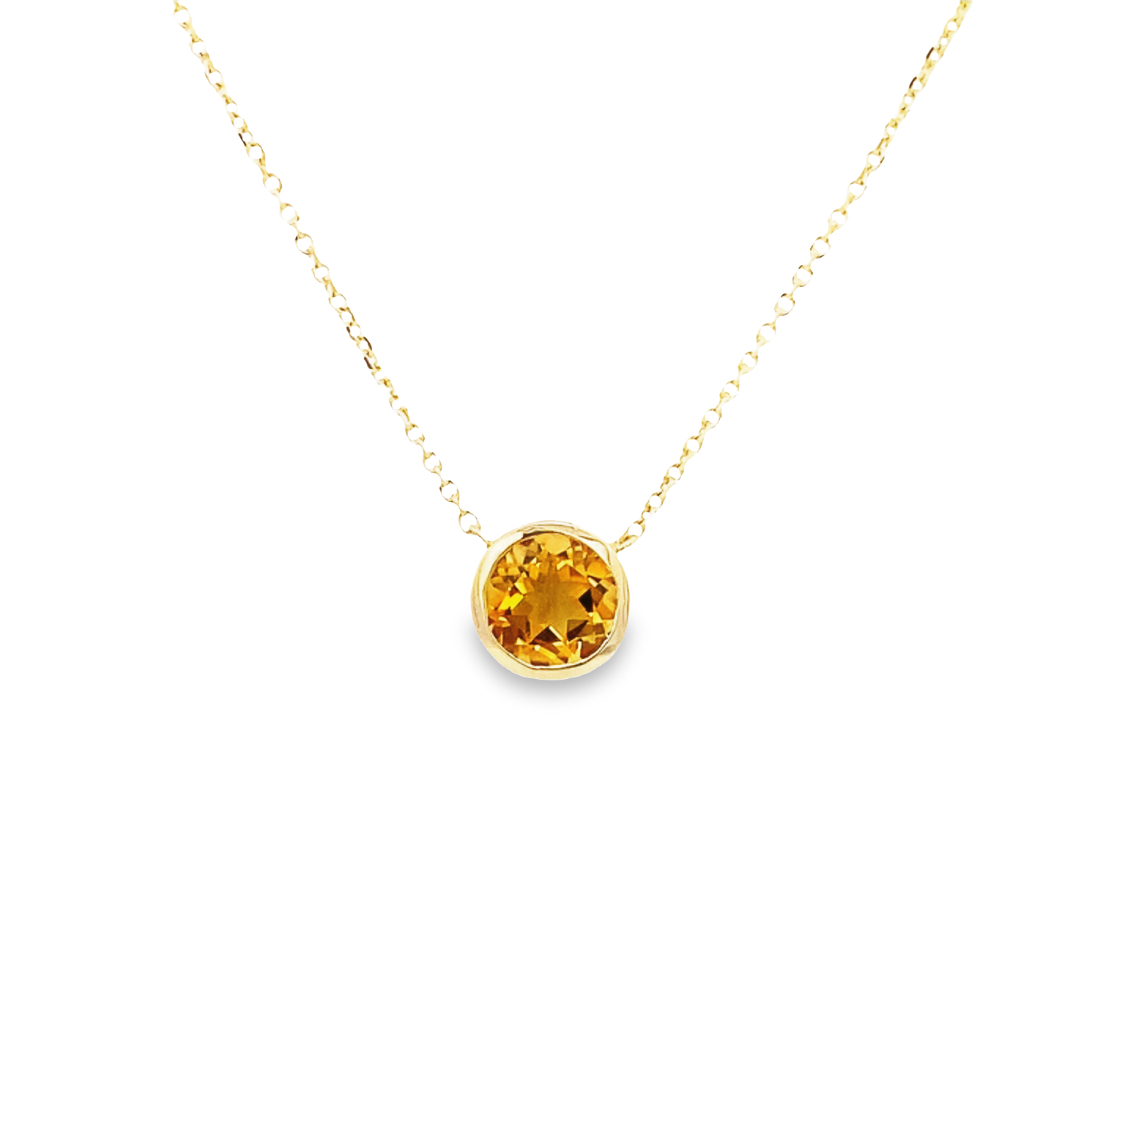 14 Karat Yellow Gold Citrine Necklace Measuring 16 Inches